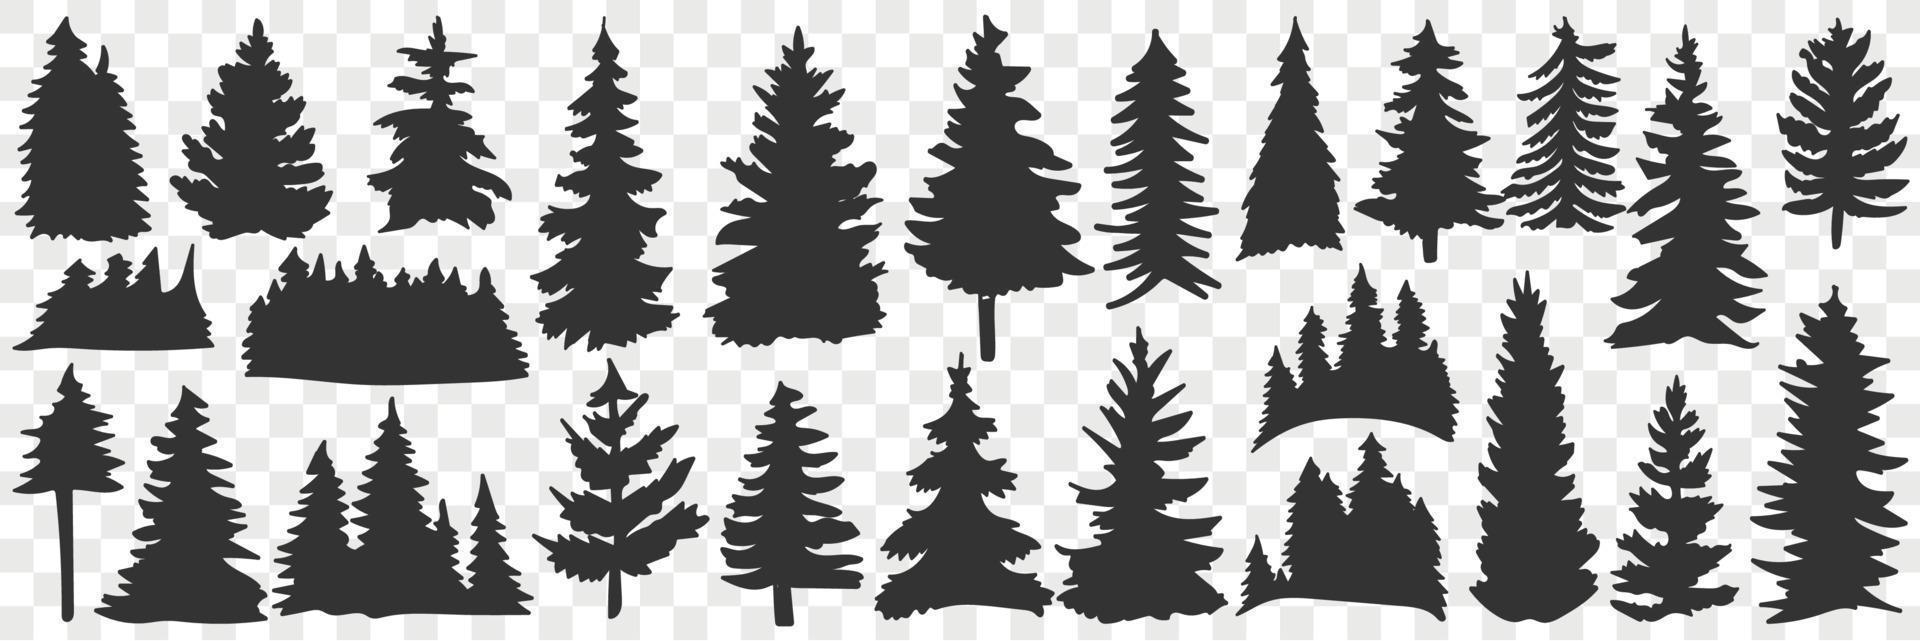 Silhouettes of spruce and pine doodle set. Collection of hand drawn various black silhouettes of forest trees pine trees in rows isolated on transparent background vector